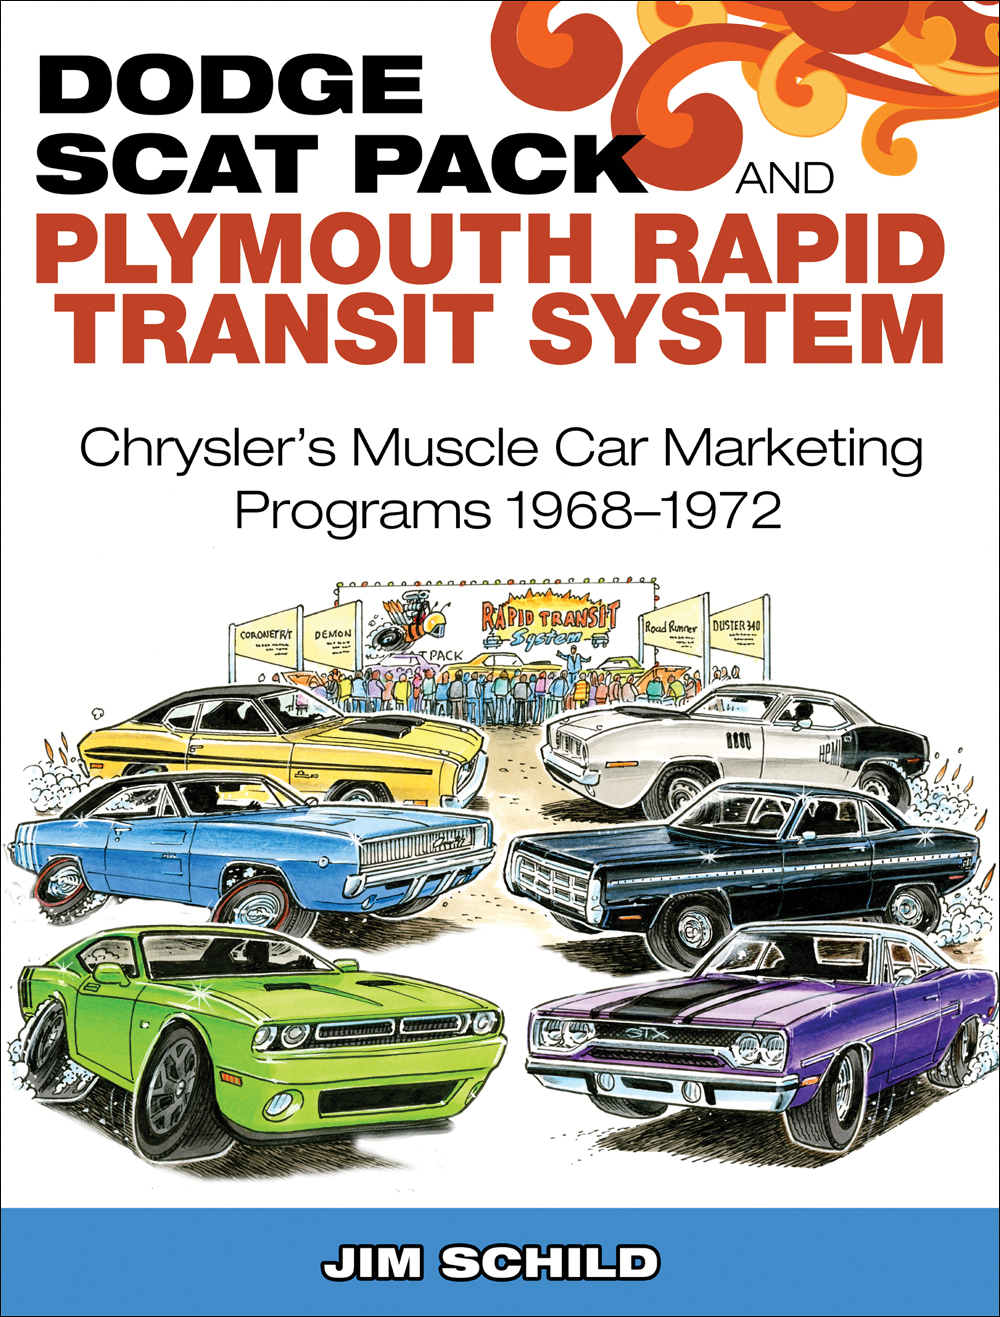 1968-1972 Dodge Scat Pack and Plymouth Rapid Transit System Program History